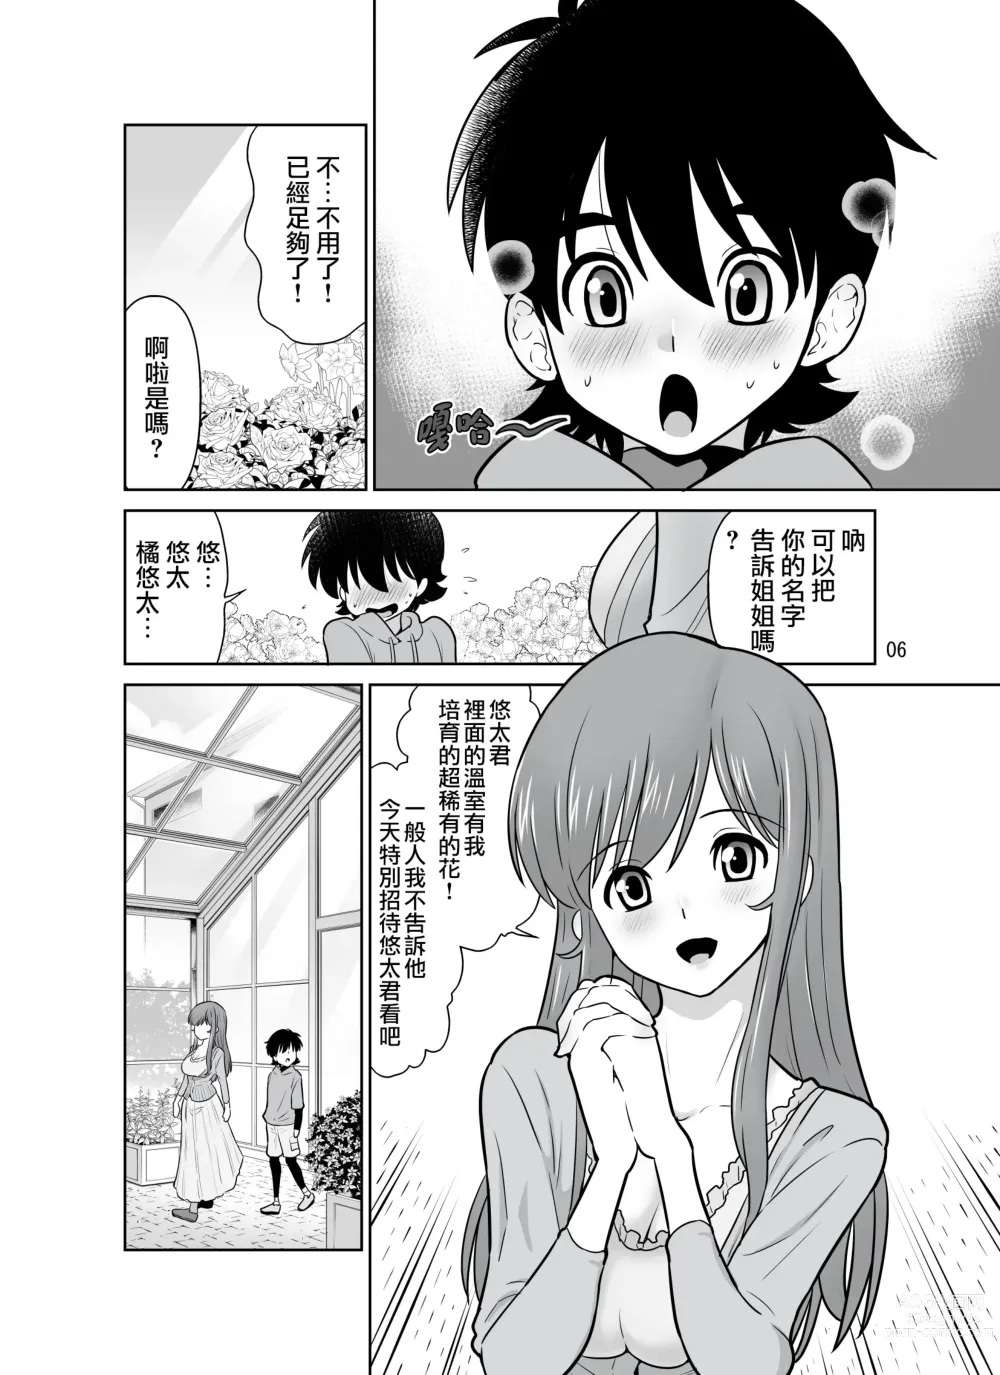 Page 6 of doujinshi 触手花店的大姐姐